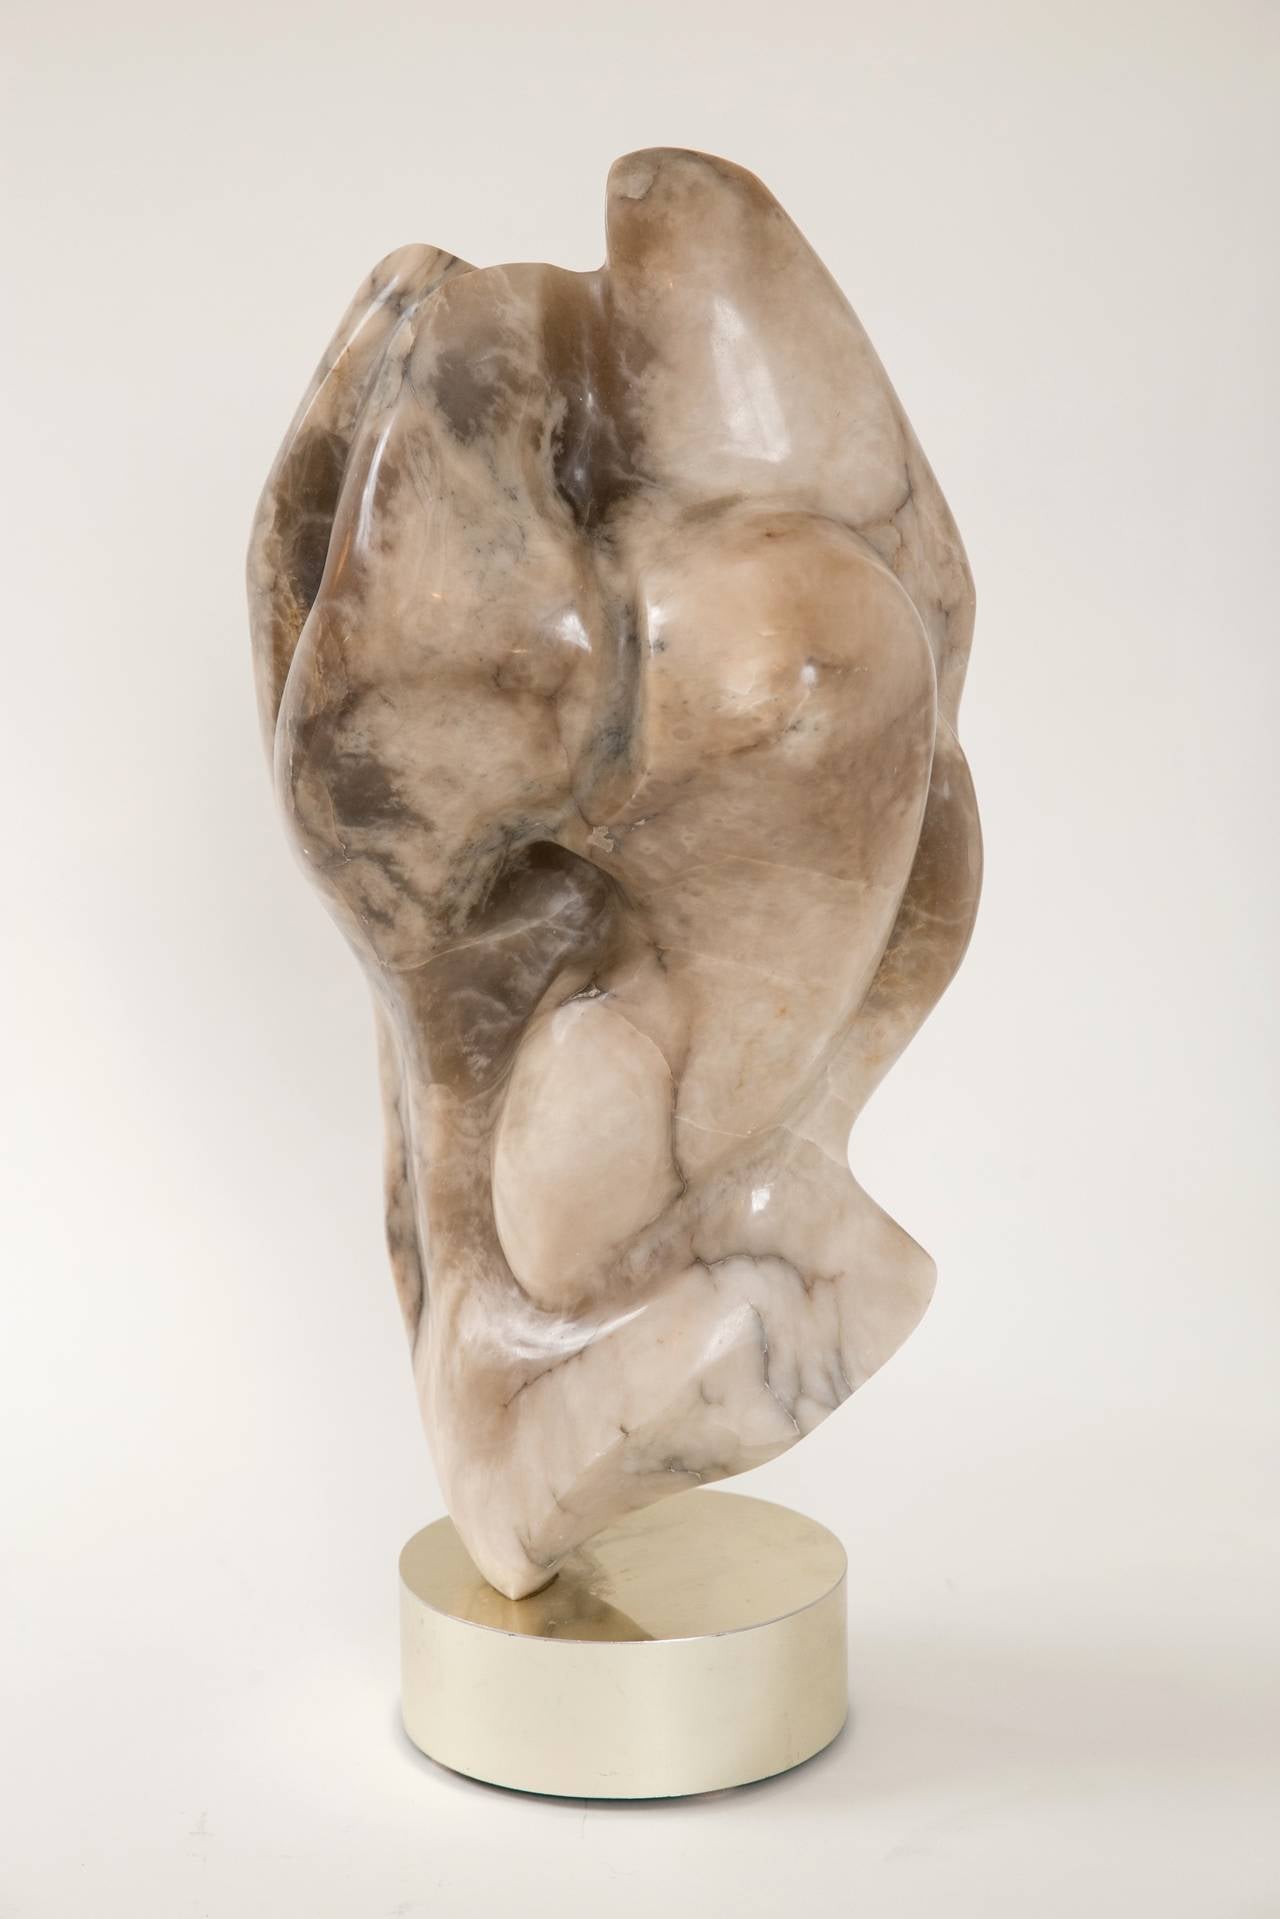 Very well made 1960's abstract stone sculpture on custom brass base. Although the piece is unsigned, the influences of Abstract Expressionism, Jean Arp, and Henry Moore are quite evident. Excellent condition.